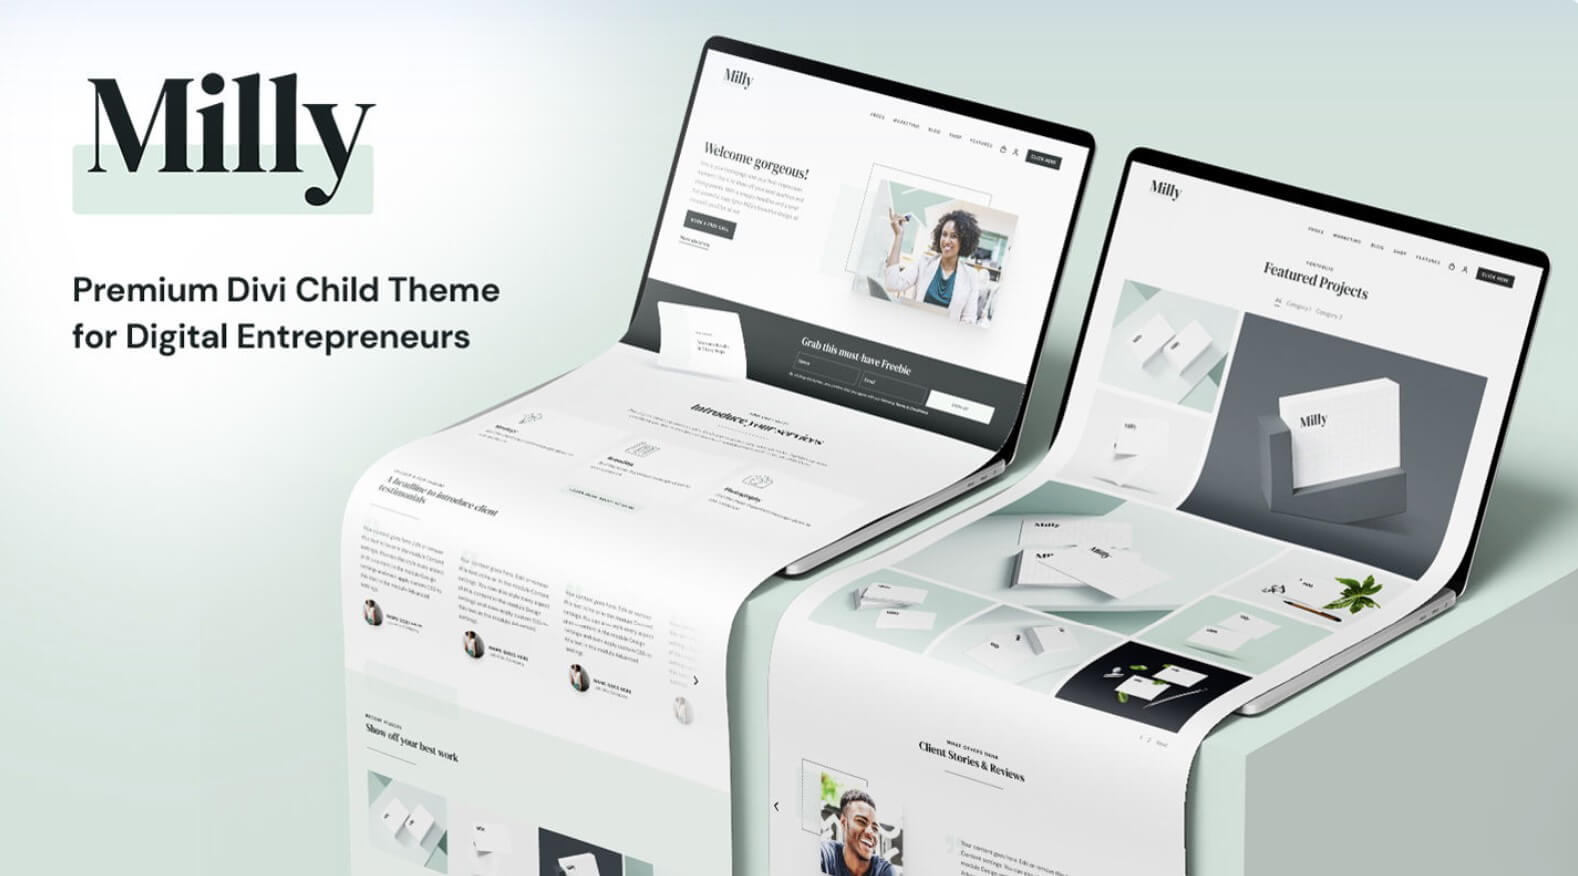 Where to Purchase Milly Child Theme